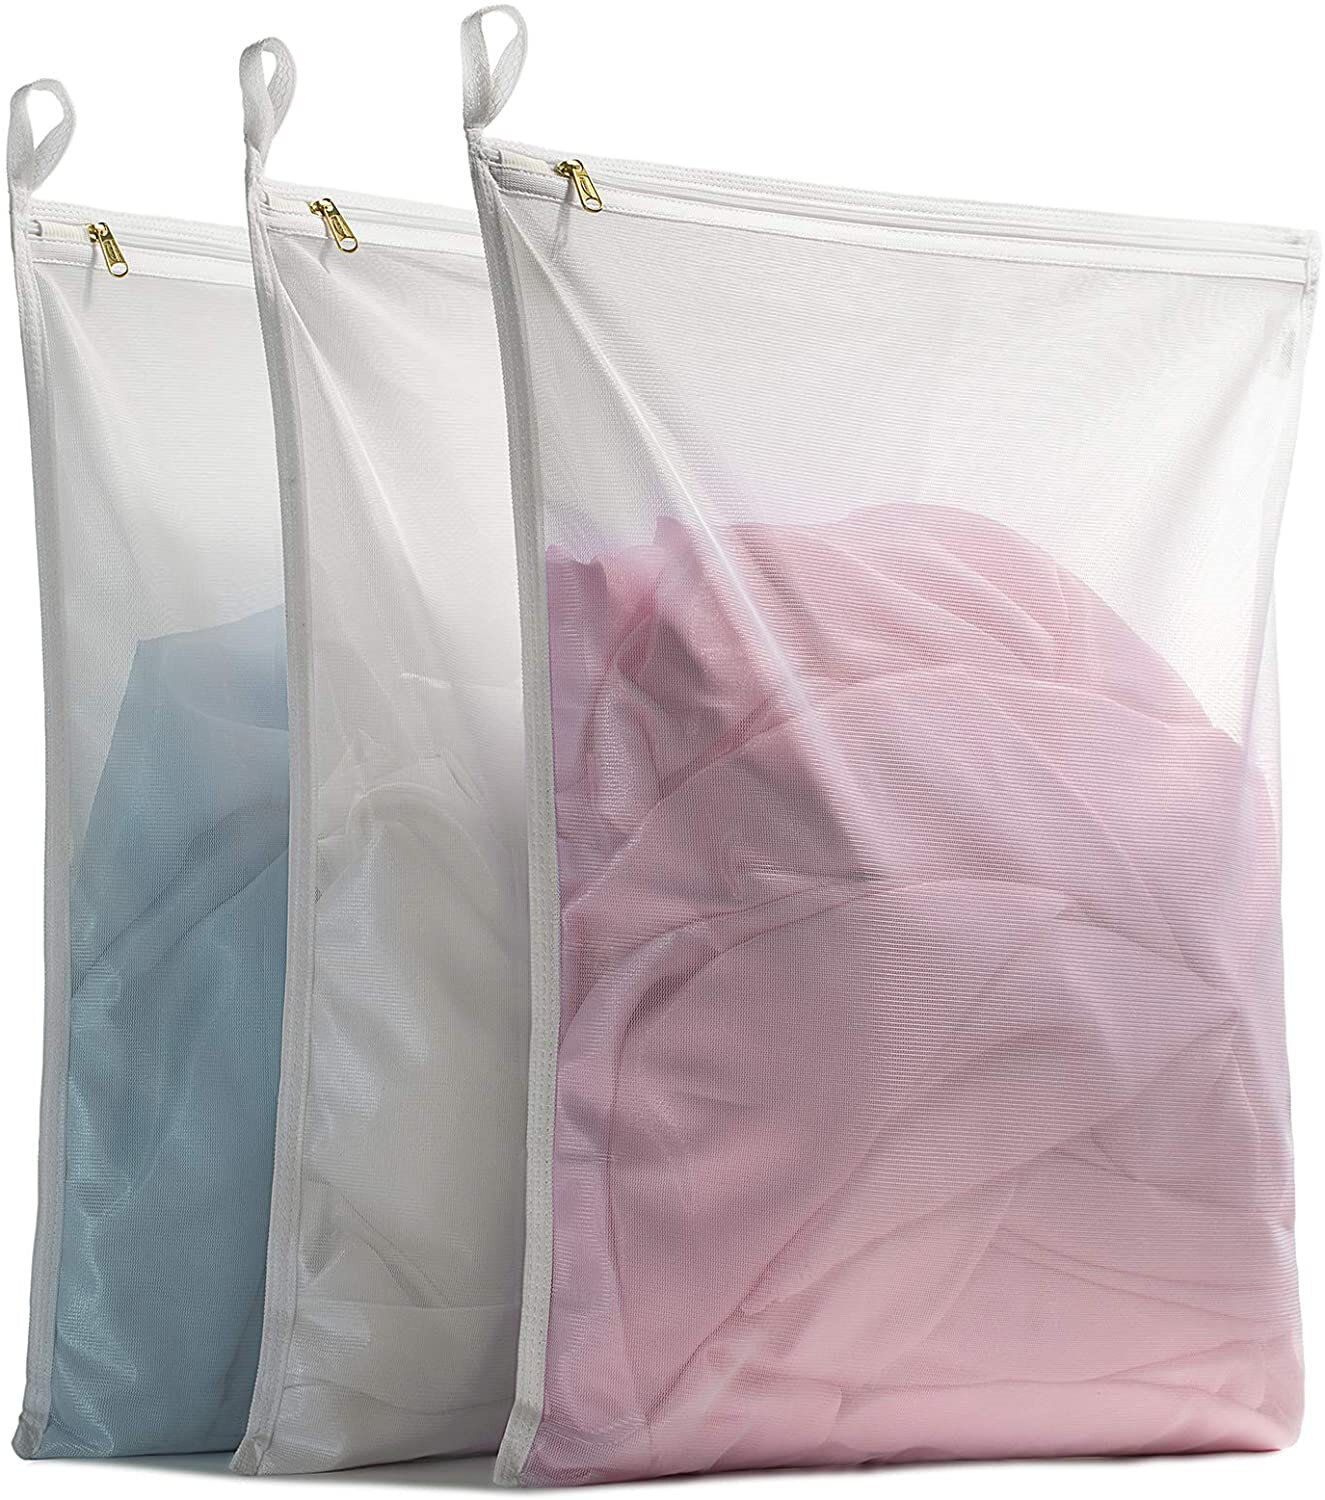 Laundry Bag Pink Polyester Zipper Laundry Bag Clothes Wash Bag in Washing Machine Laundry Container Bra Socks Underwear Clothes Bag Color : A